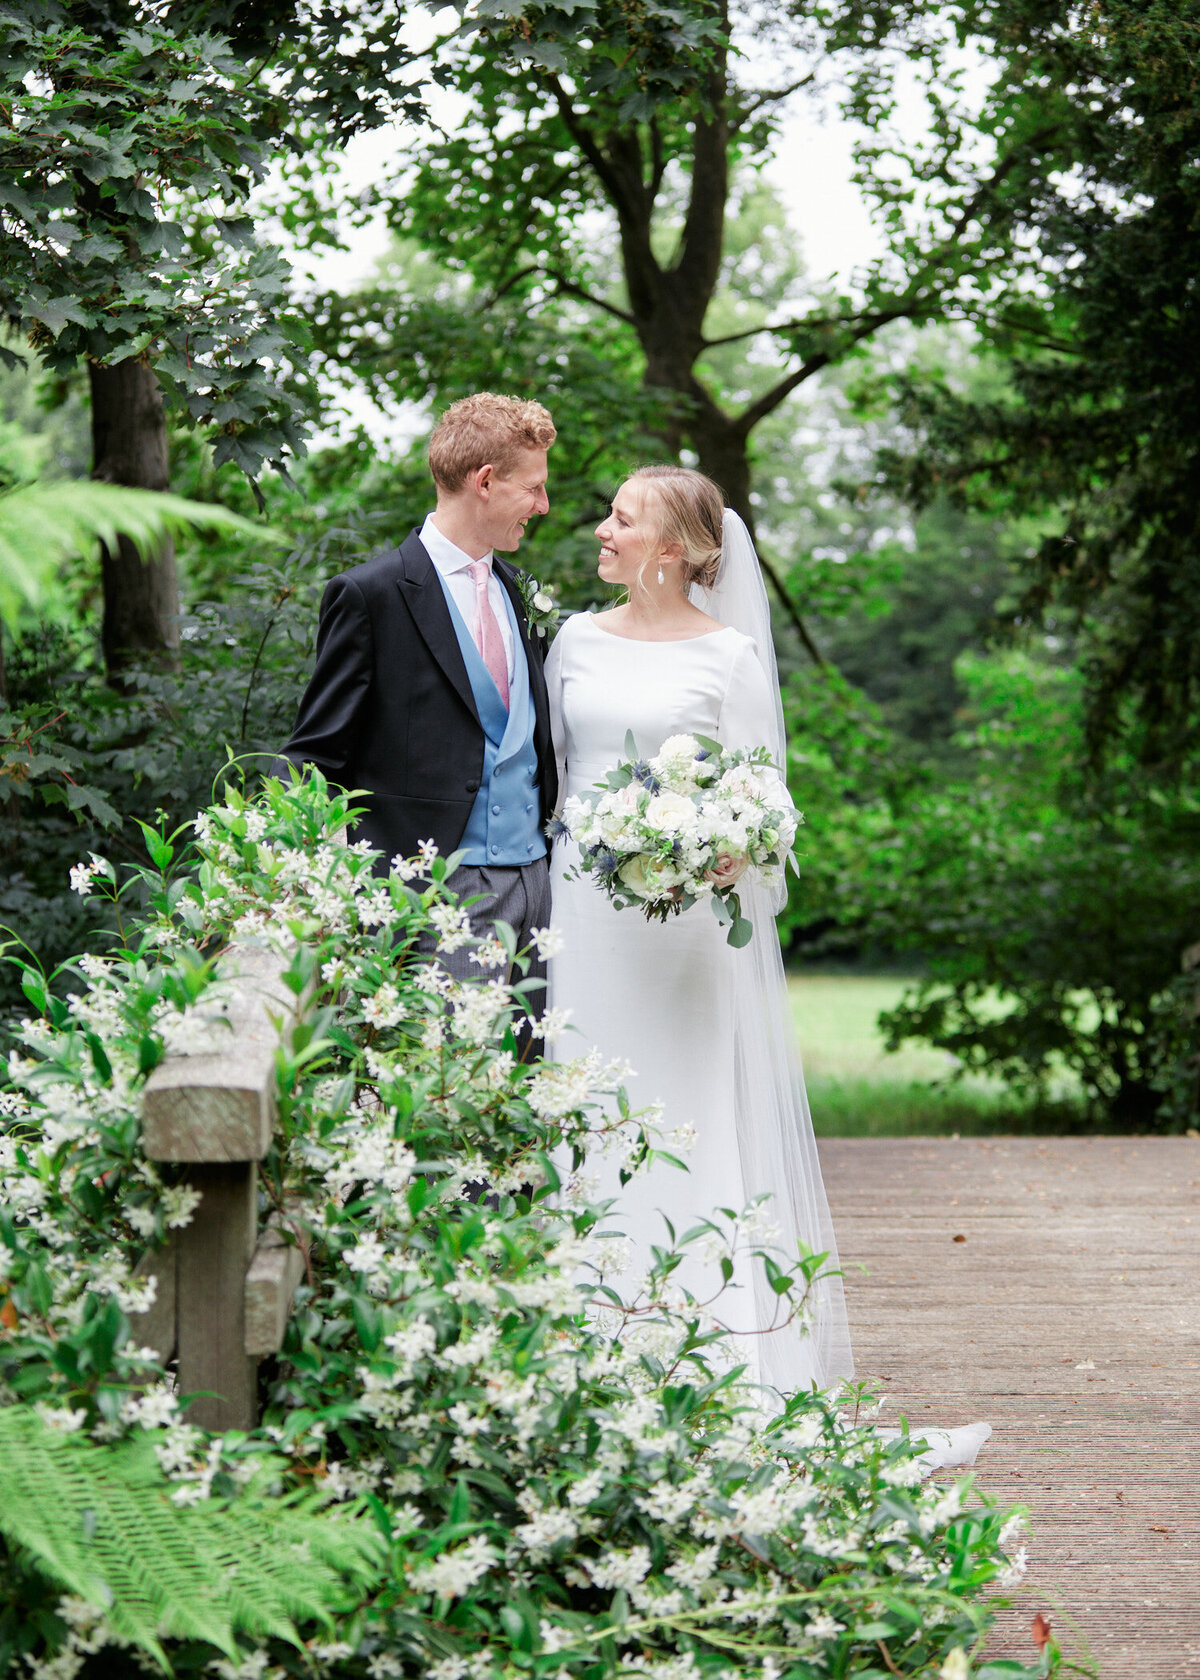 bride in beautiful satin wedding dress and groom in suit with pink tie and blue vest posing on the wooden bridge among greenery